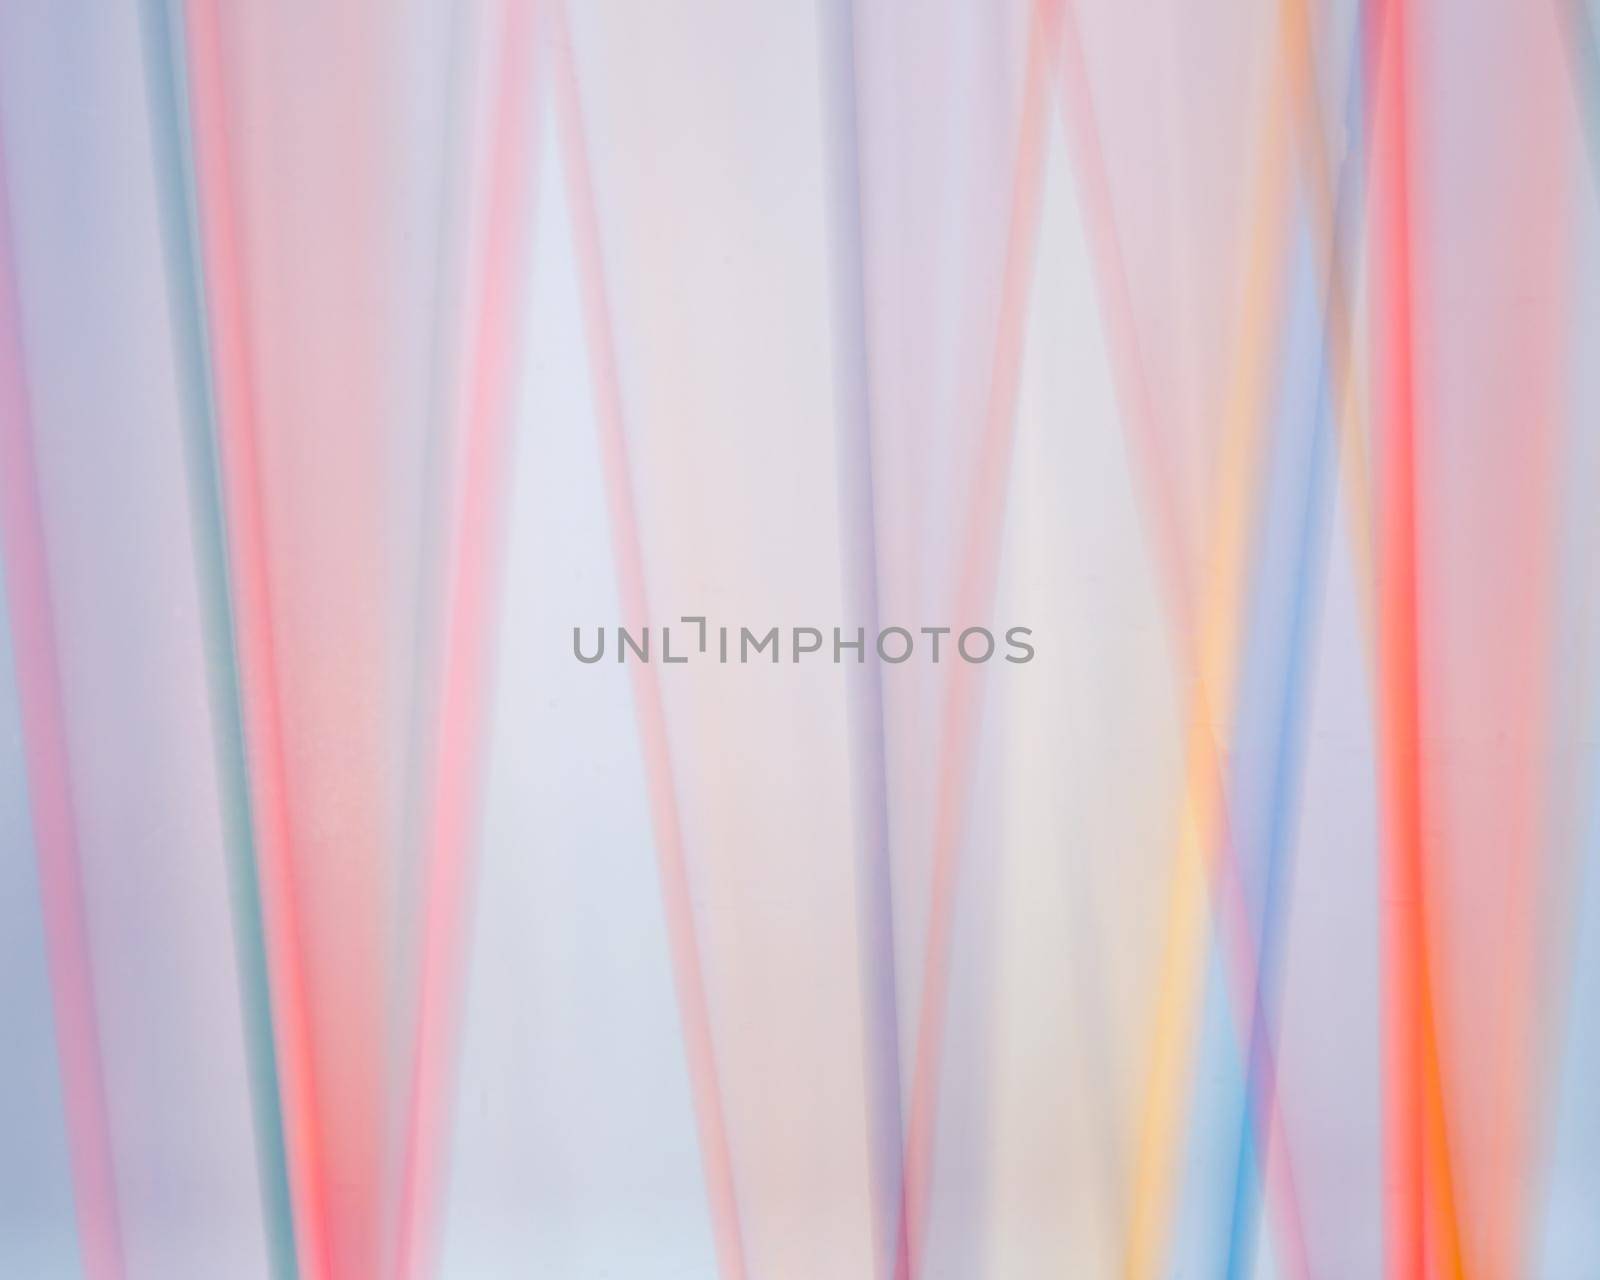 Colored Dowels Blurred Against White by CharlieFloyd